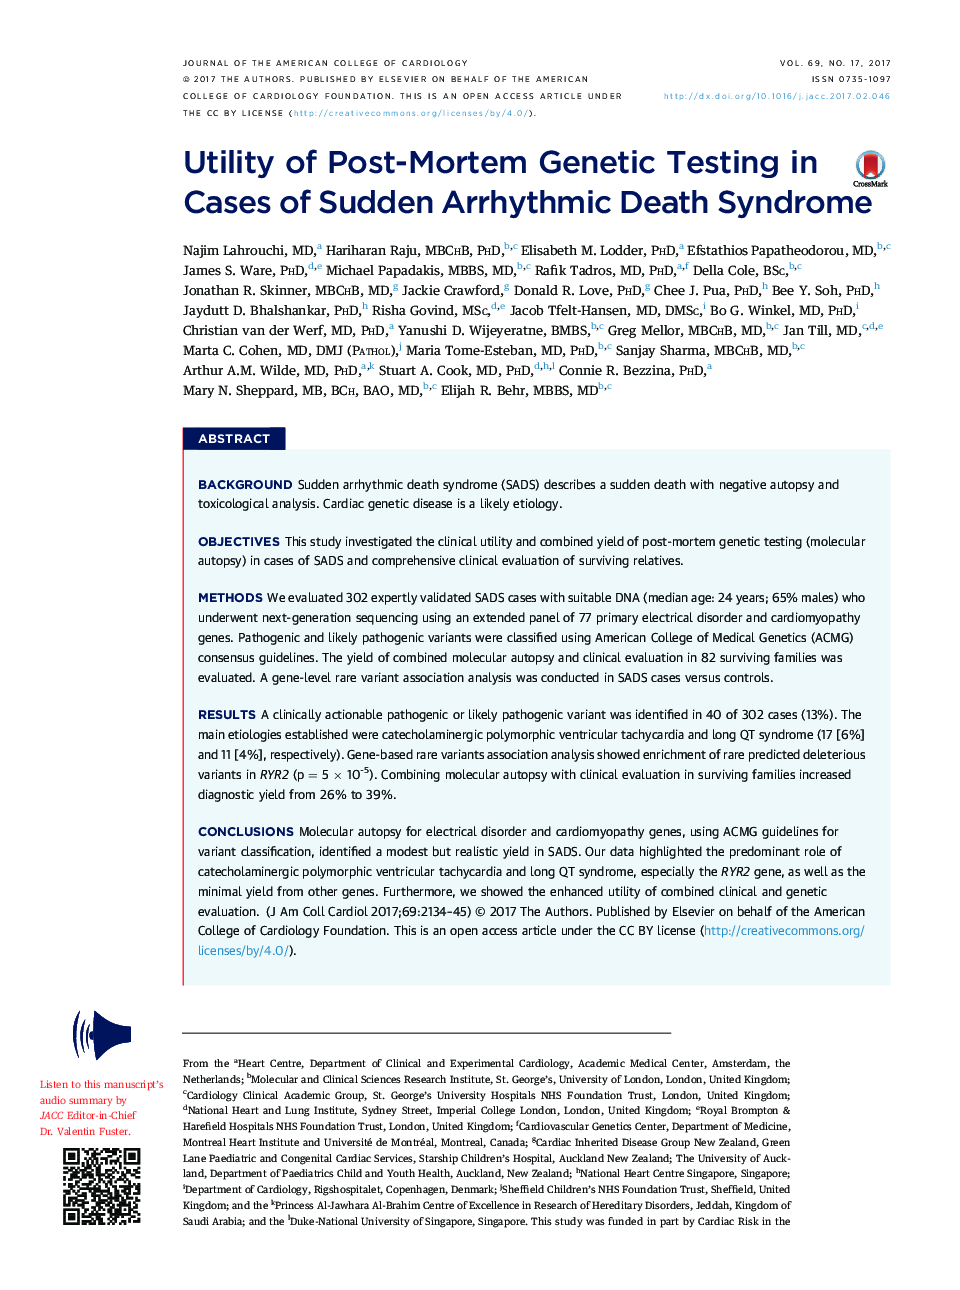 Utility of Post-Mortem Genetic Testing in Cases of Sudden Arrhythmic Death Syndrome